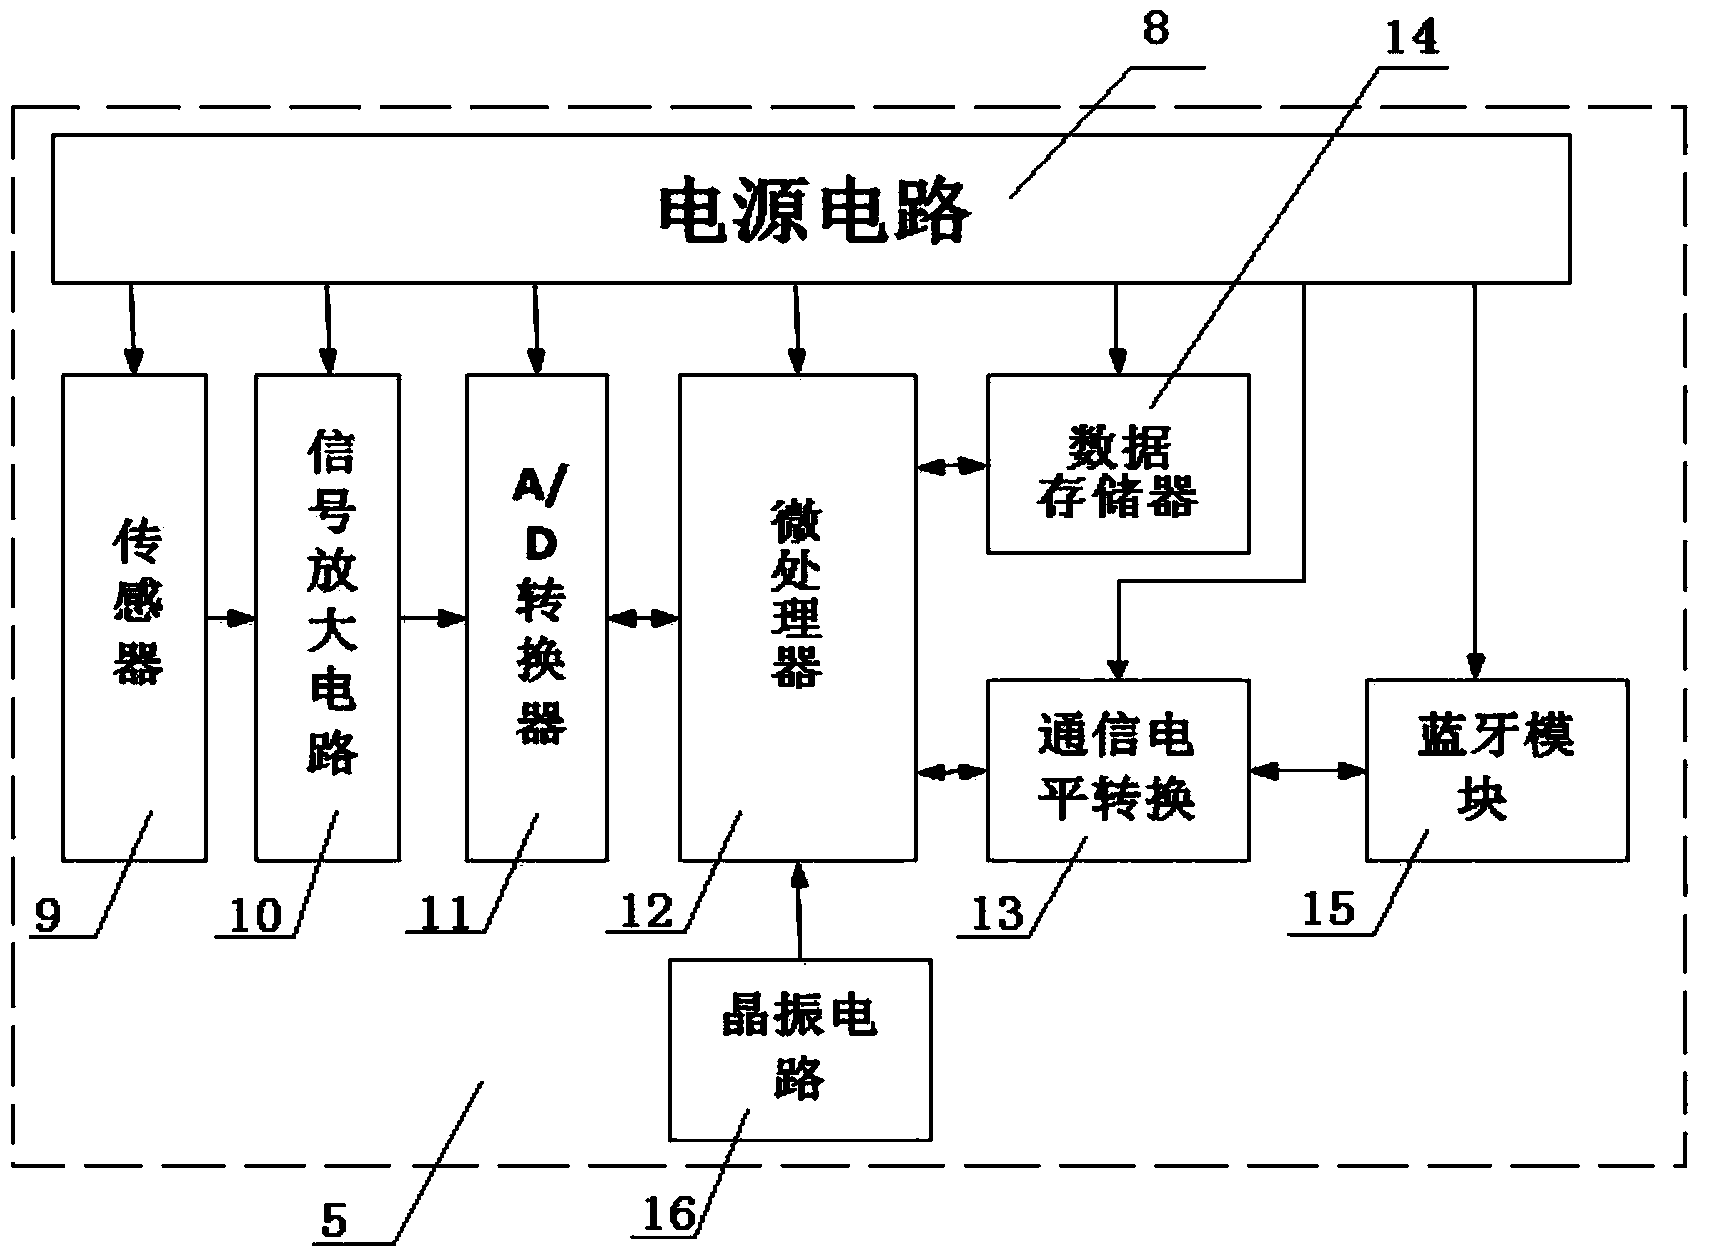 Movement operation and maintenance system and method of power communication network